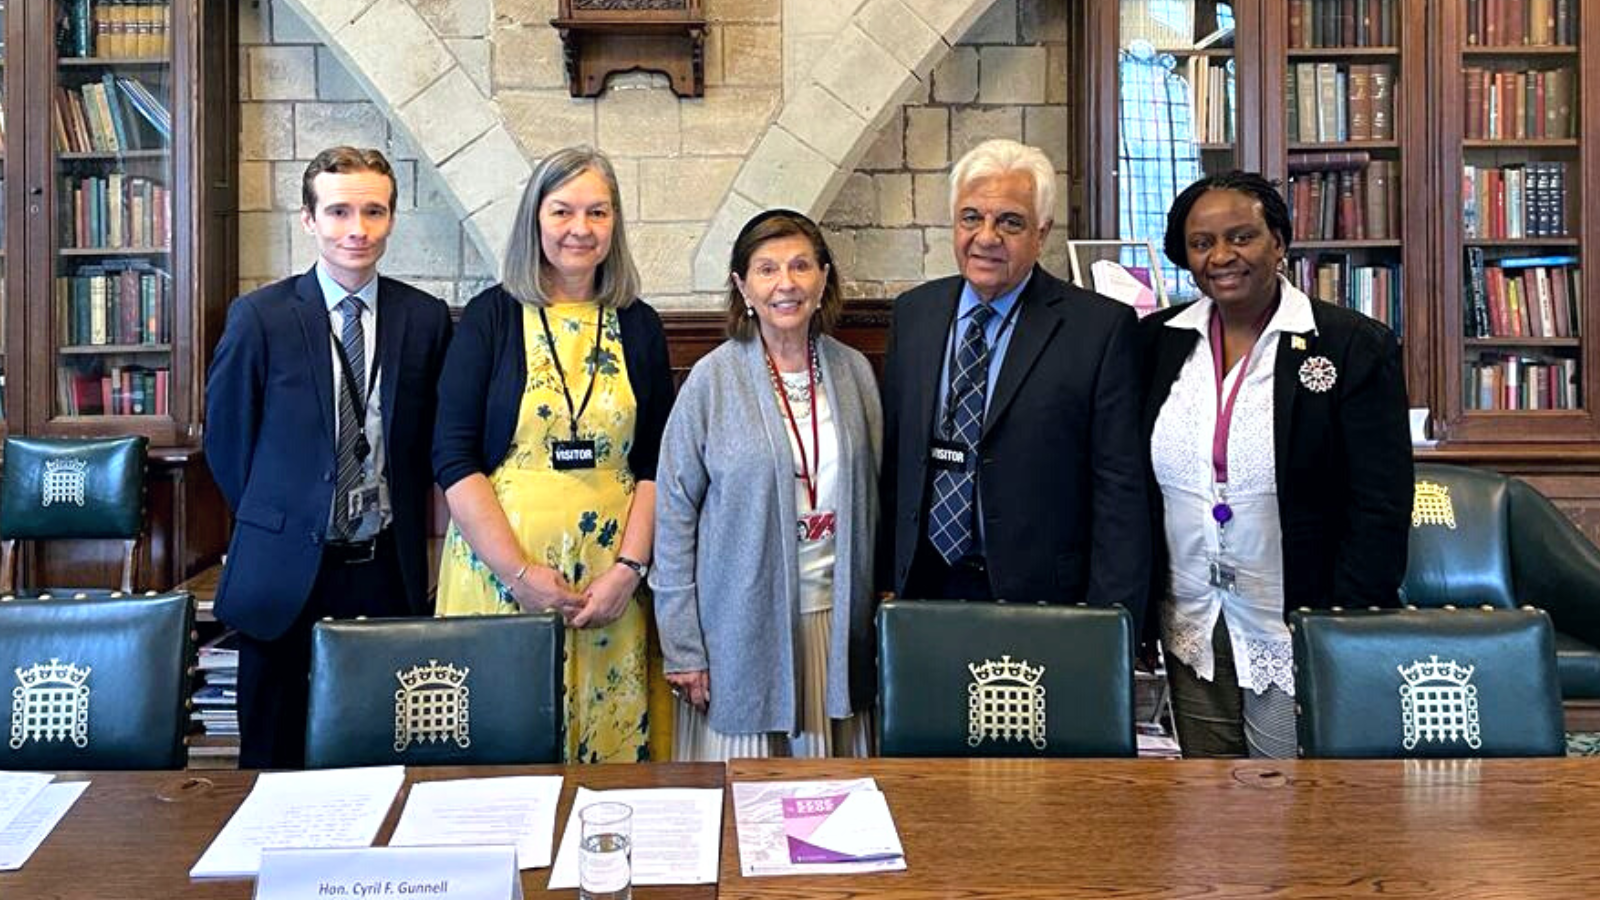 The Speaker of St Helena stands with Baroness D'Souza from the UK House of Lords